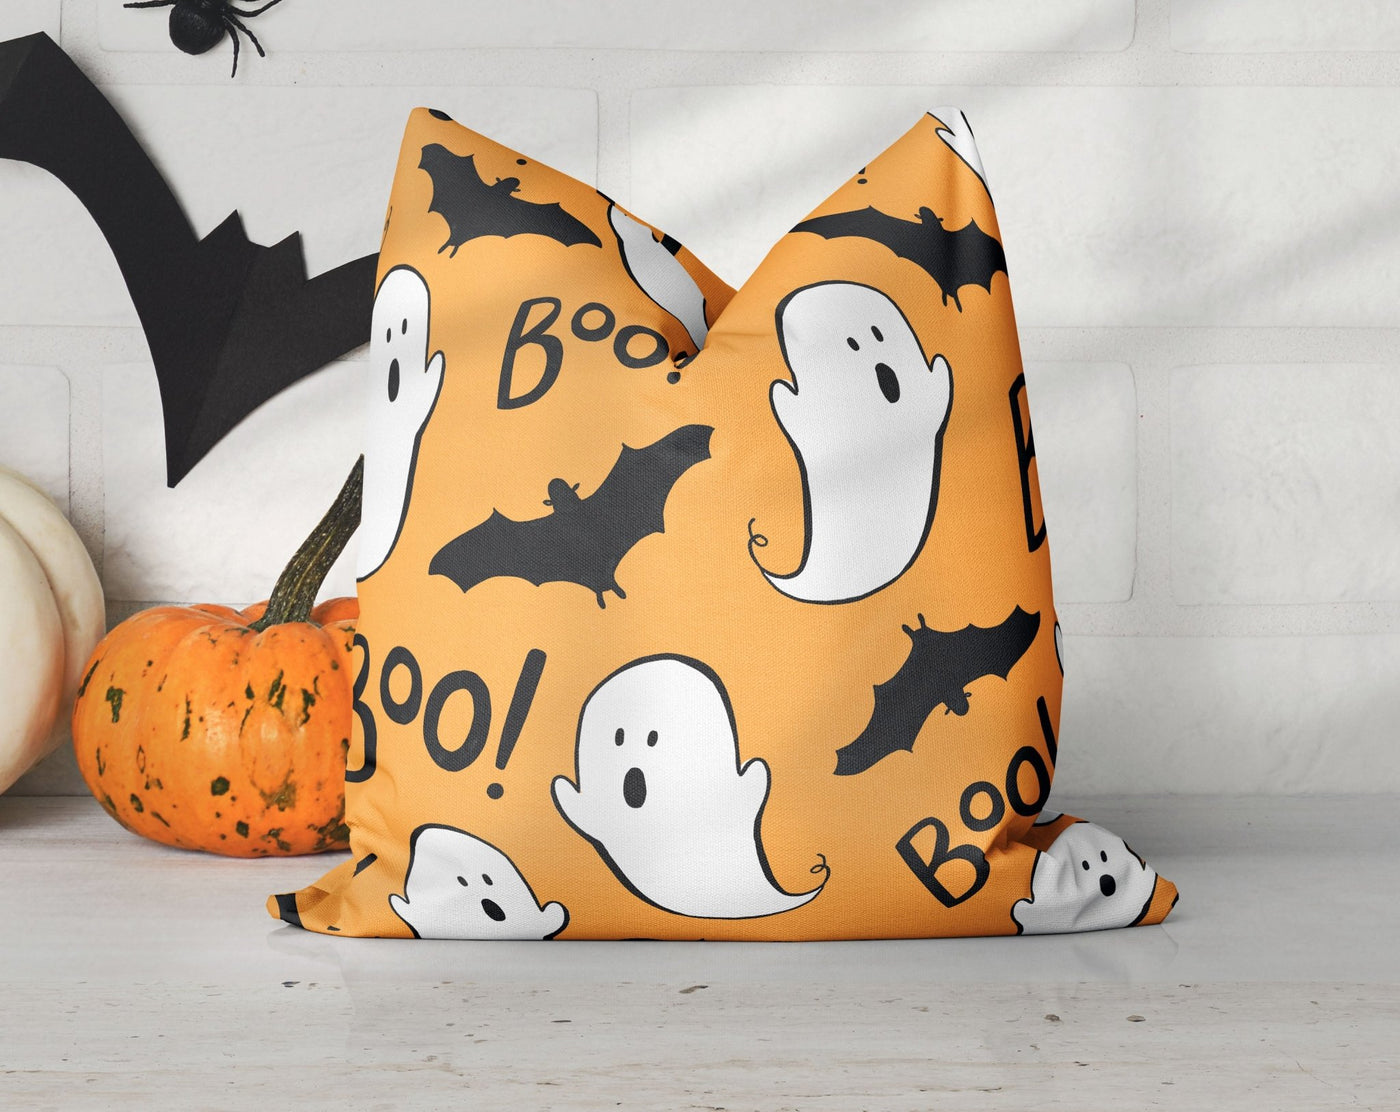 Halloween Boo Ghosts and Bats Orange Pillow Throw Cover with Insert - Cush Potato Pillows